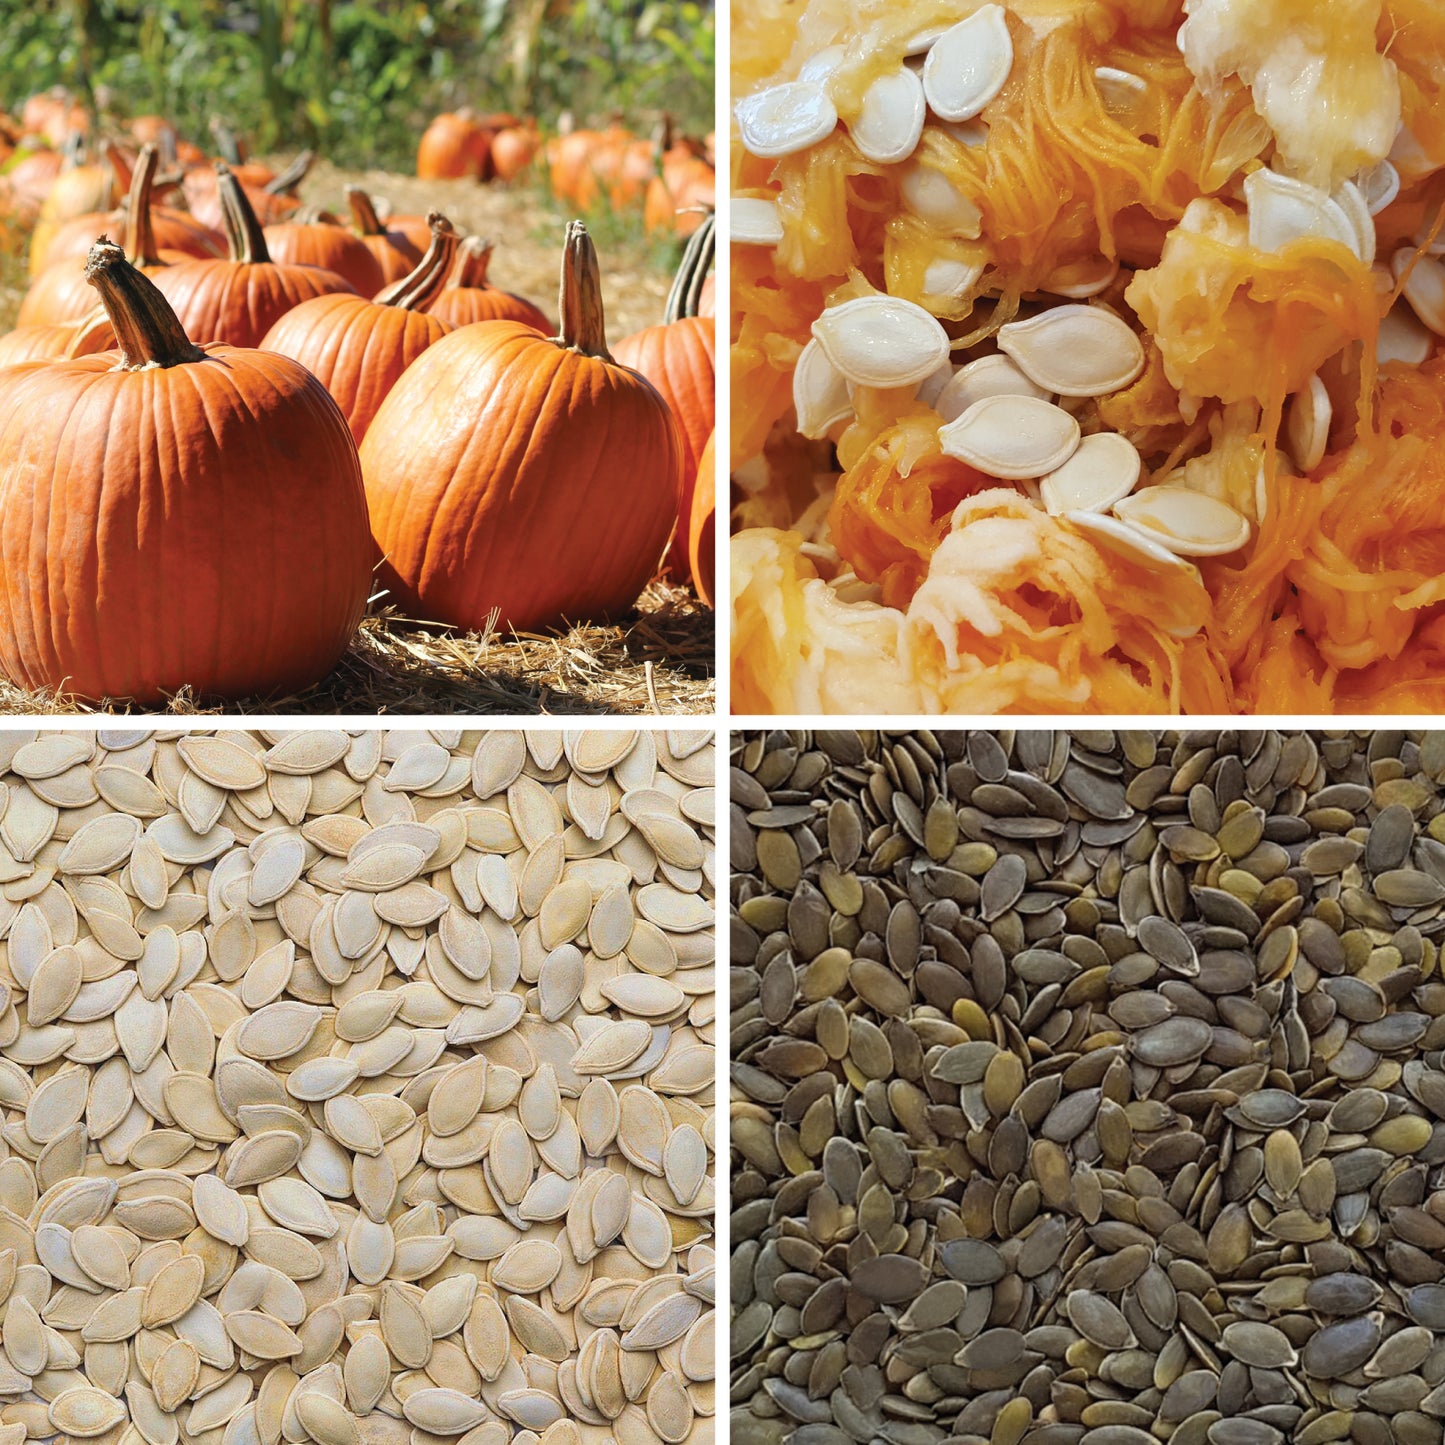 BY NATURE Pumpkin Seeds - Certified Organic at Source